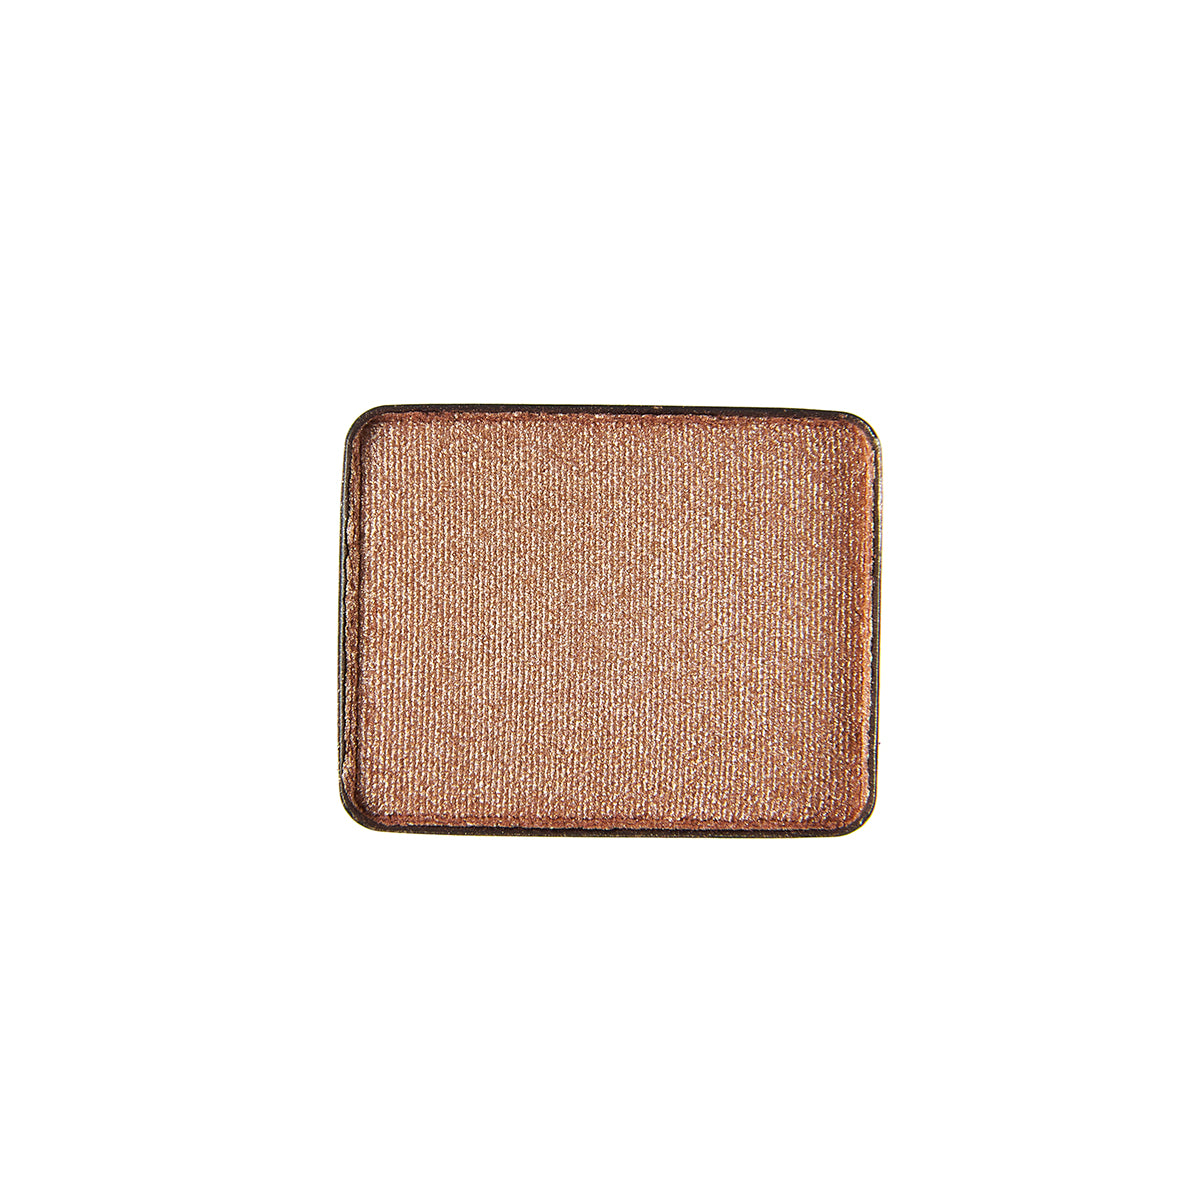 Eyeshadow Compact Refill - Eclipse